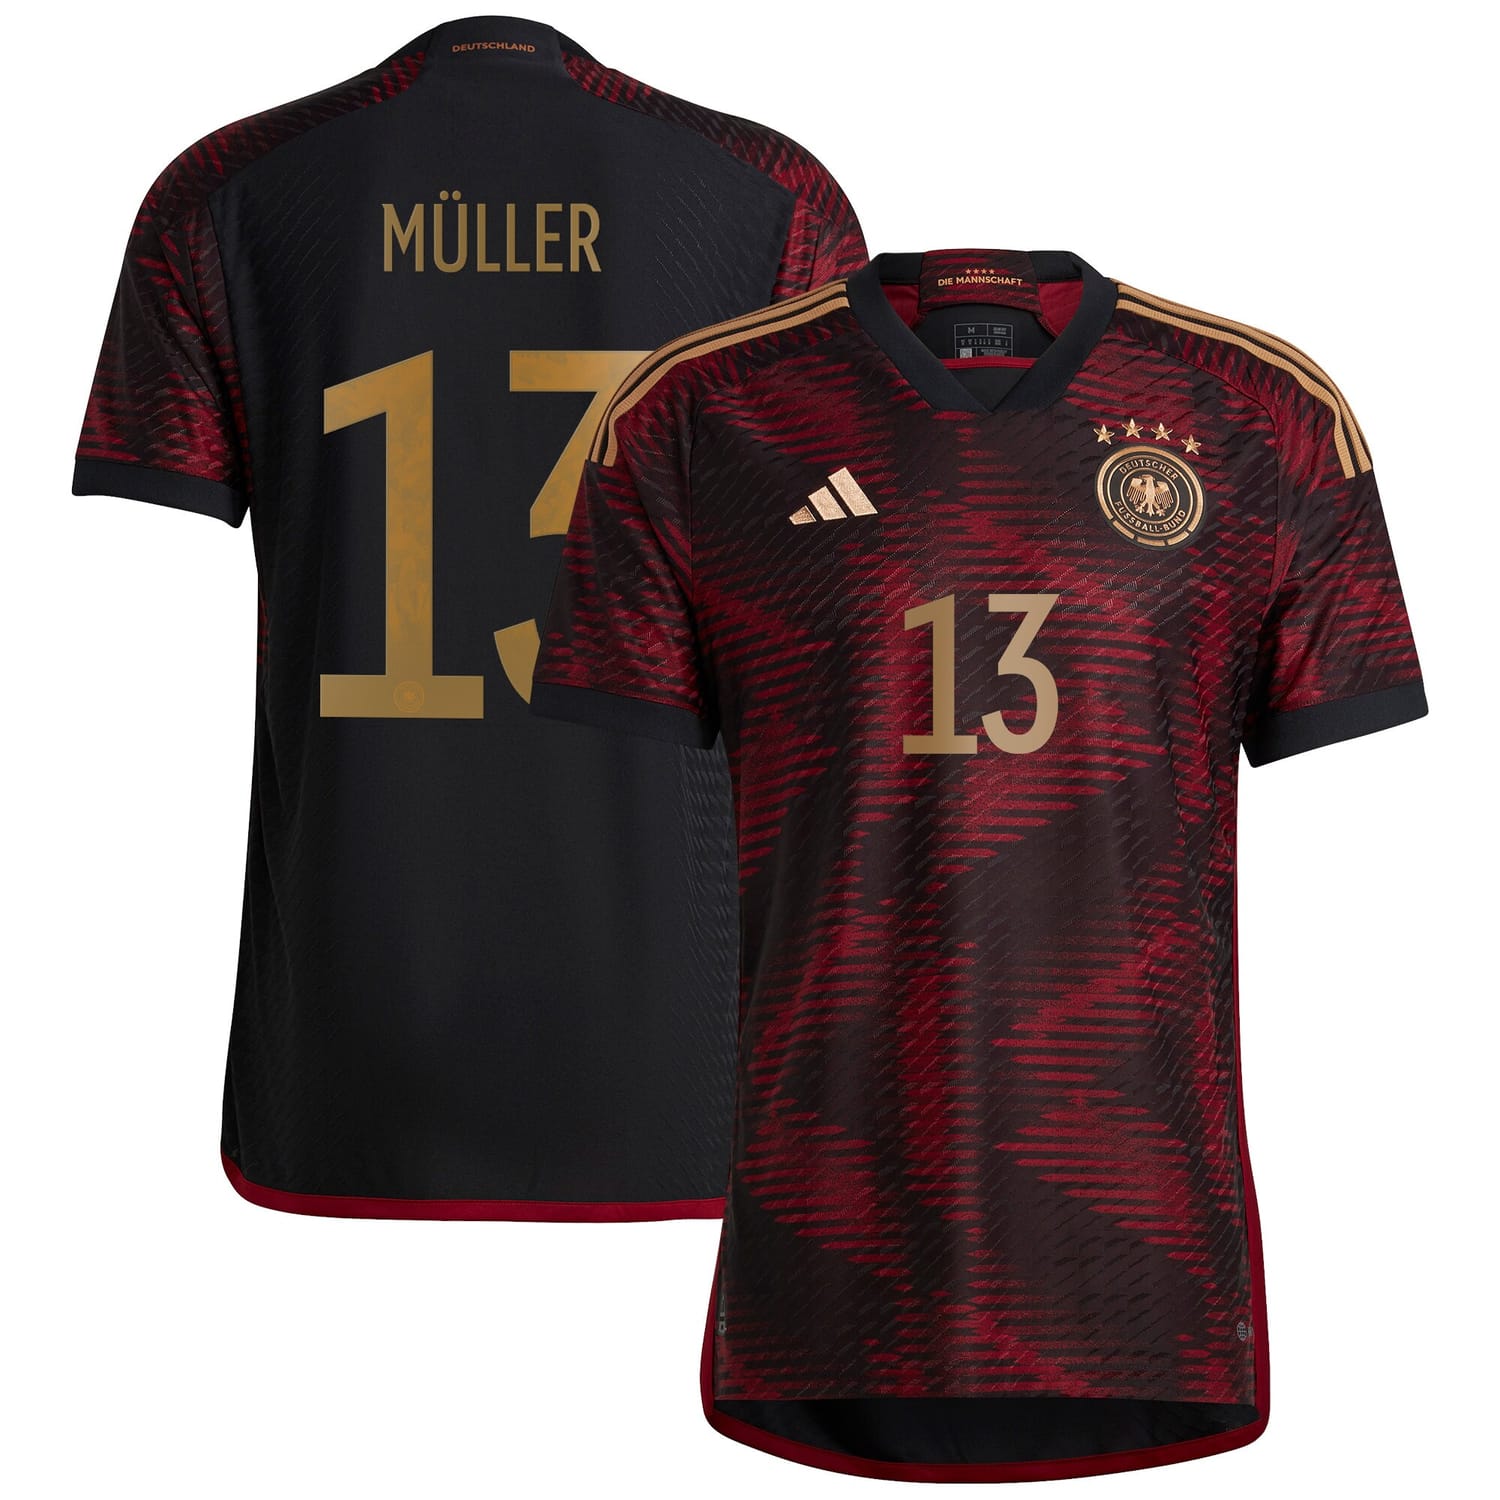 Germany National Team Away Authentic Jersey Shirt Black 2022-23 player Thomas Müller printing for Men